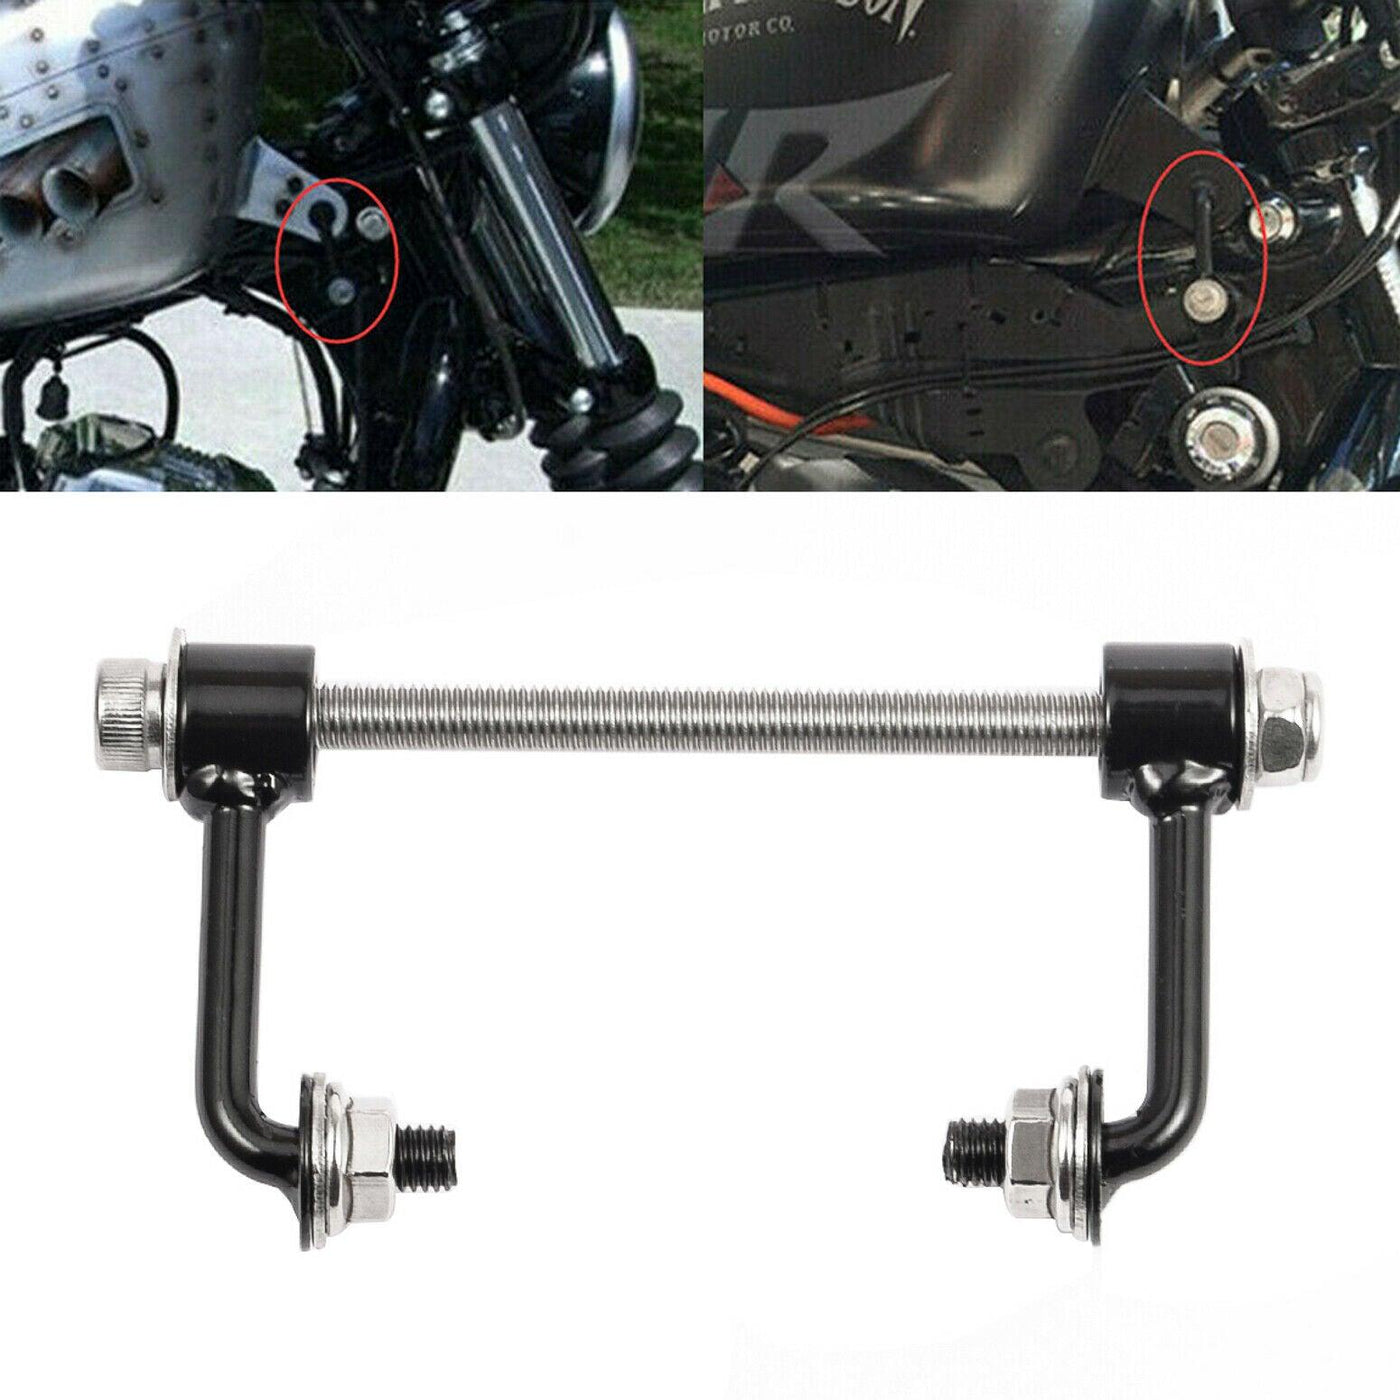 2"Gas Tank Lift Riser Kit Fit for Harley Sportster XL1200 883 1100 72 48 86-18 - Moto Life Products